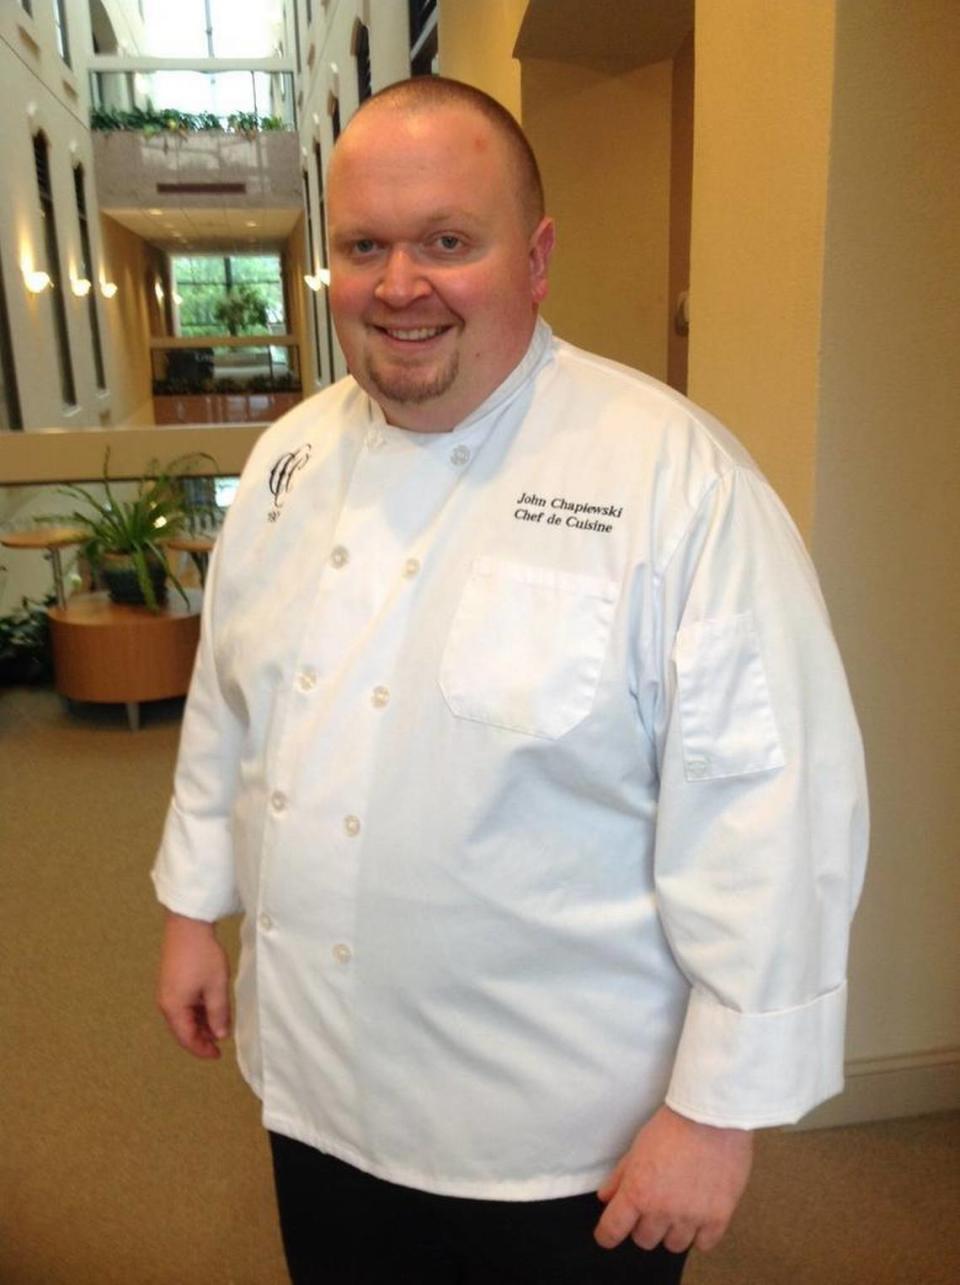 John Chapiewski, 42, a culinary instructor at Central High School in Phenix City, volunteers to teach cooking classes for Open Door Community House and even picks up extra money working at the Country Club of Columbus.